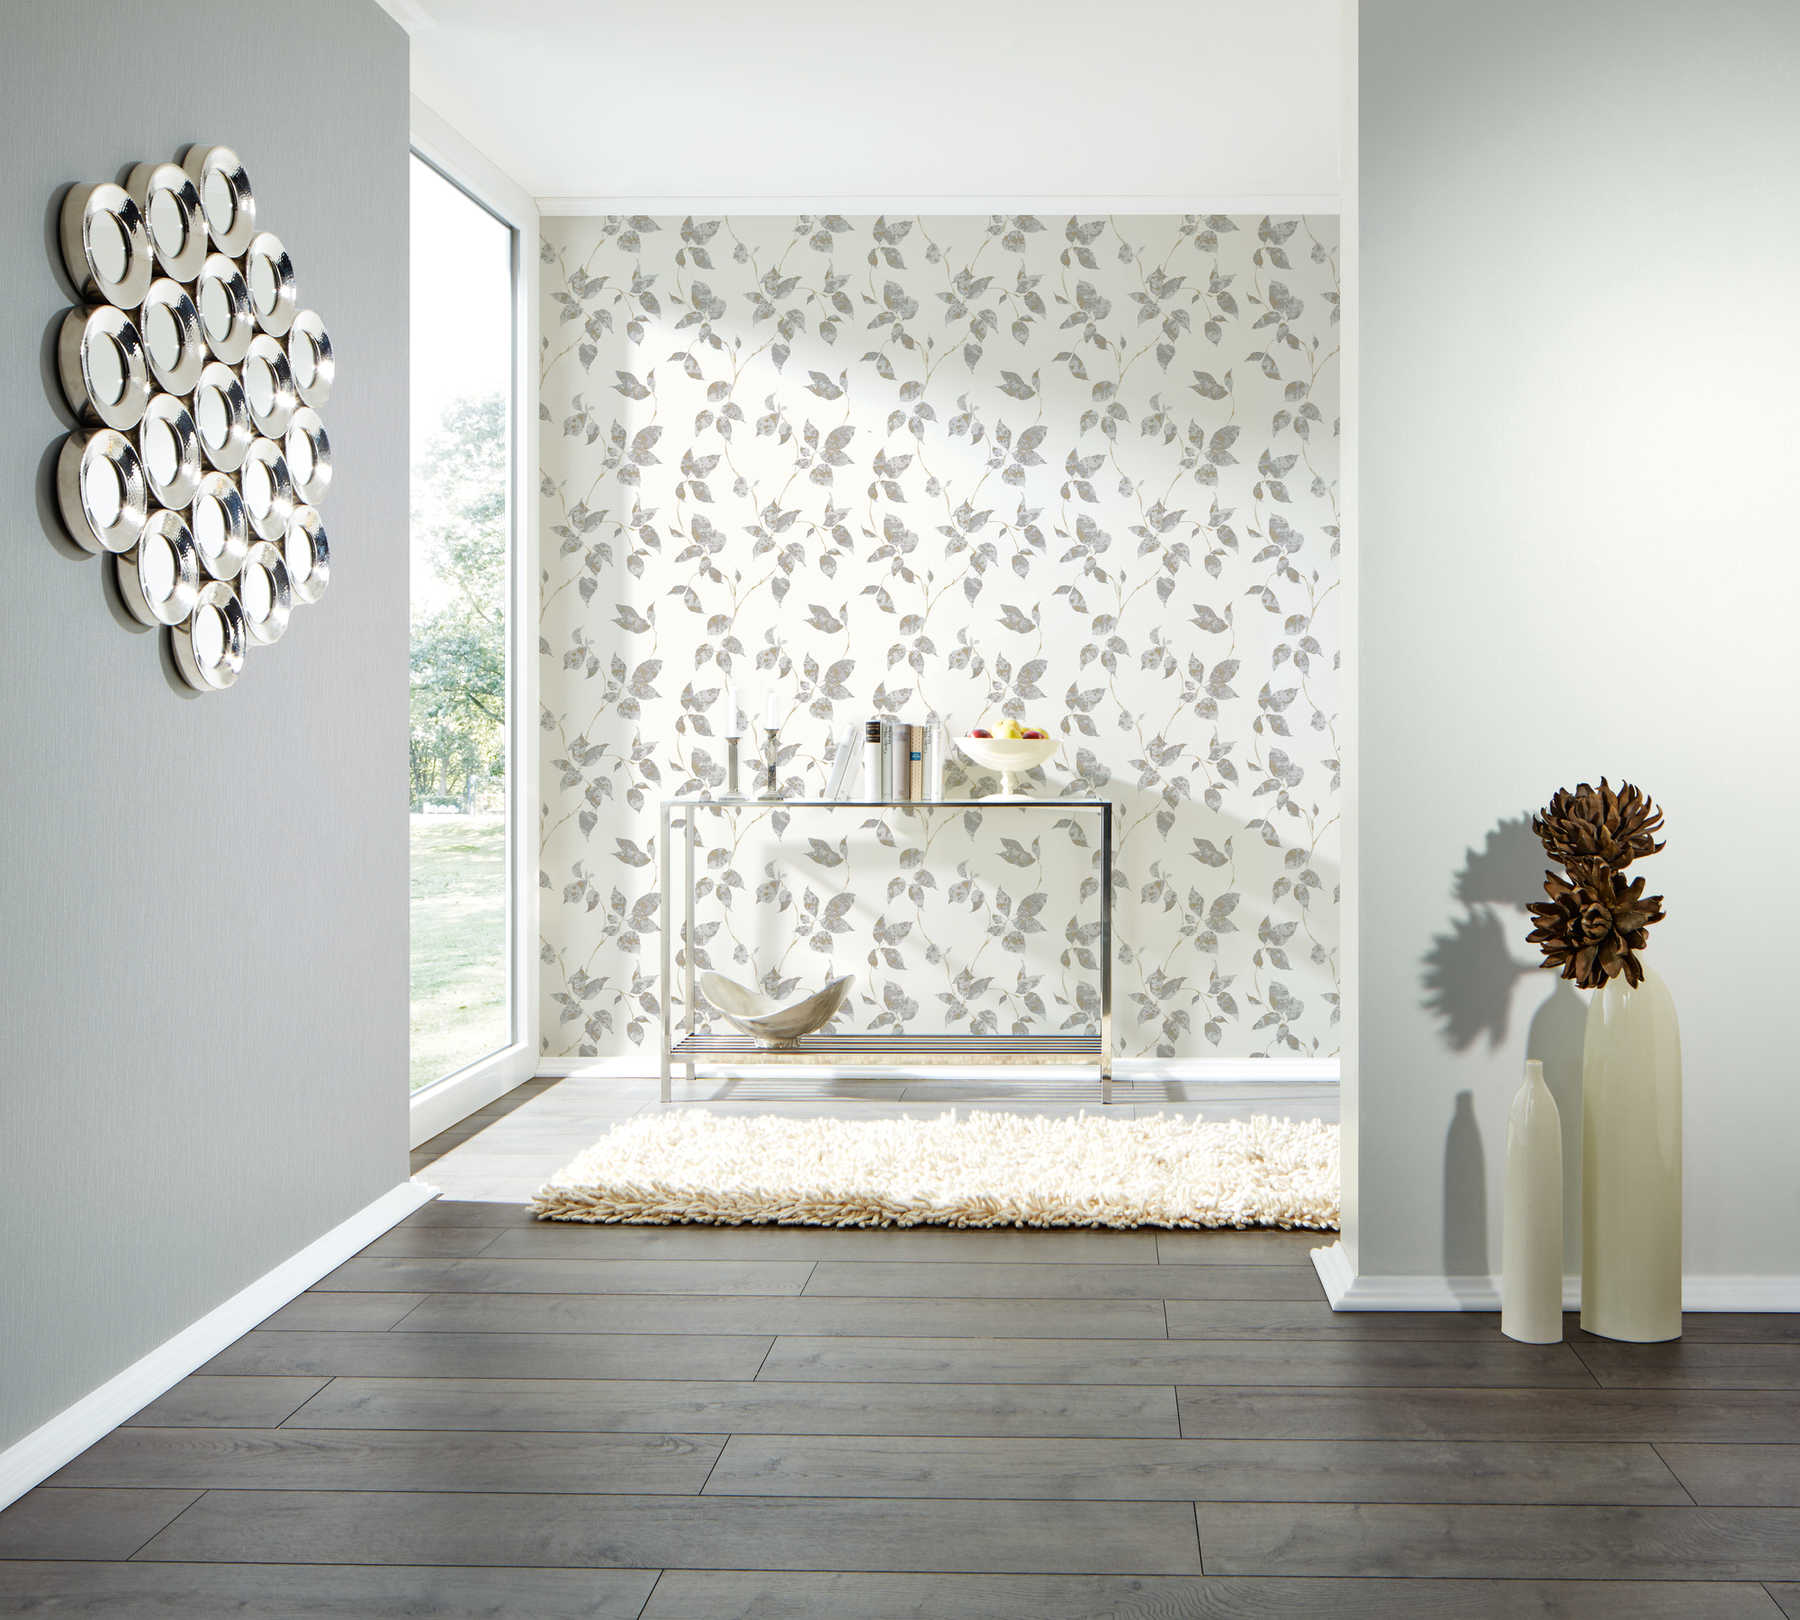             Country house wallpaper grey with texture effect & plaster look
        